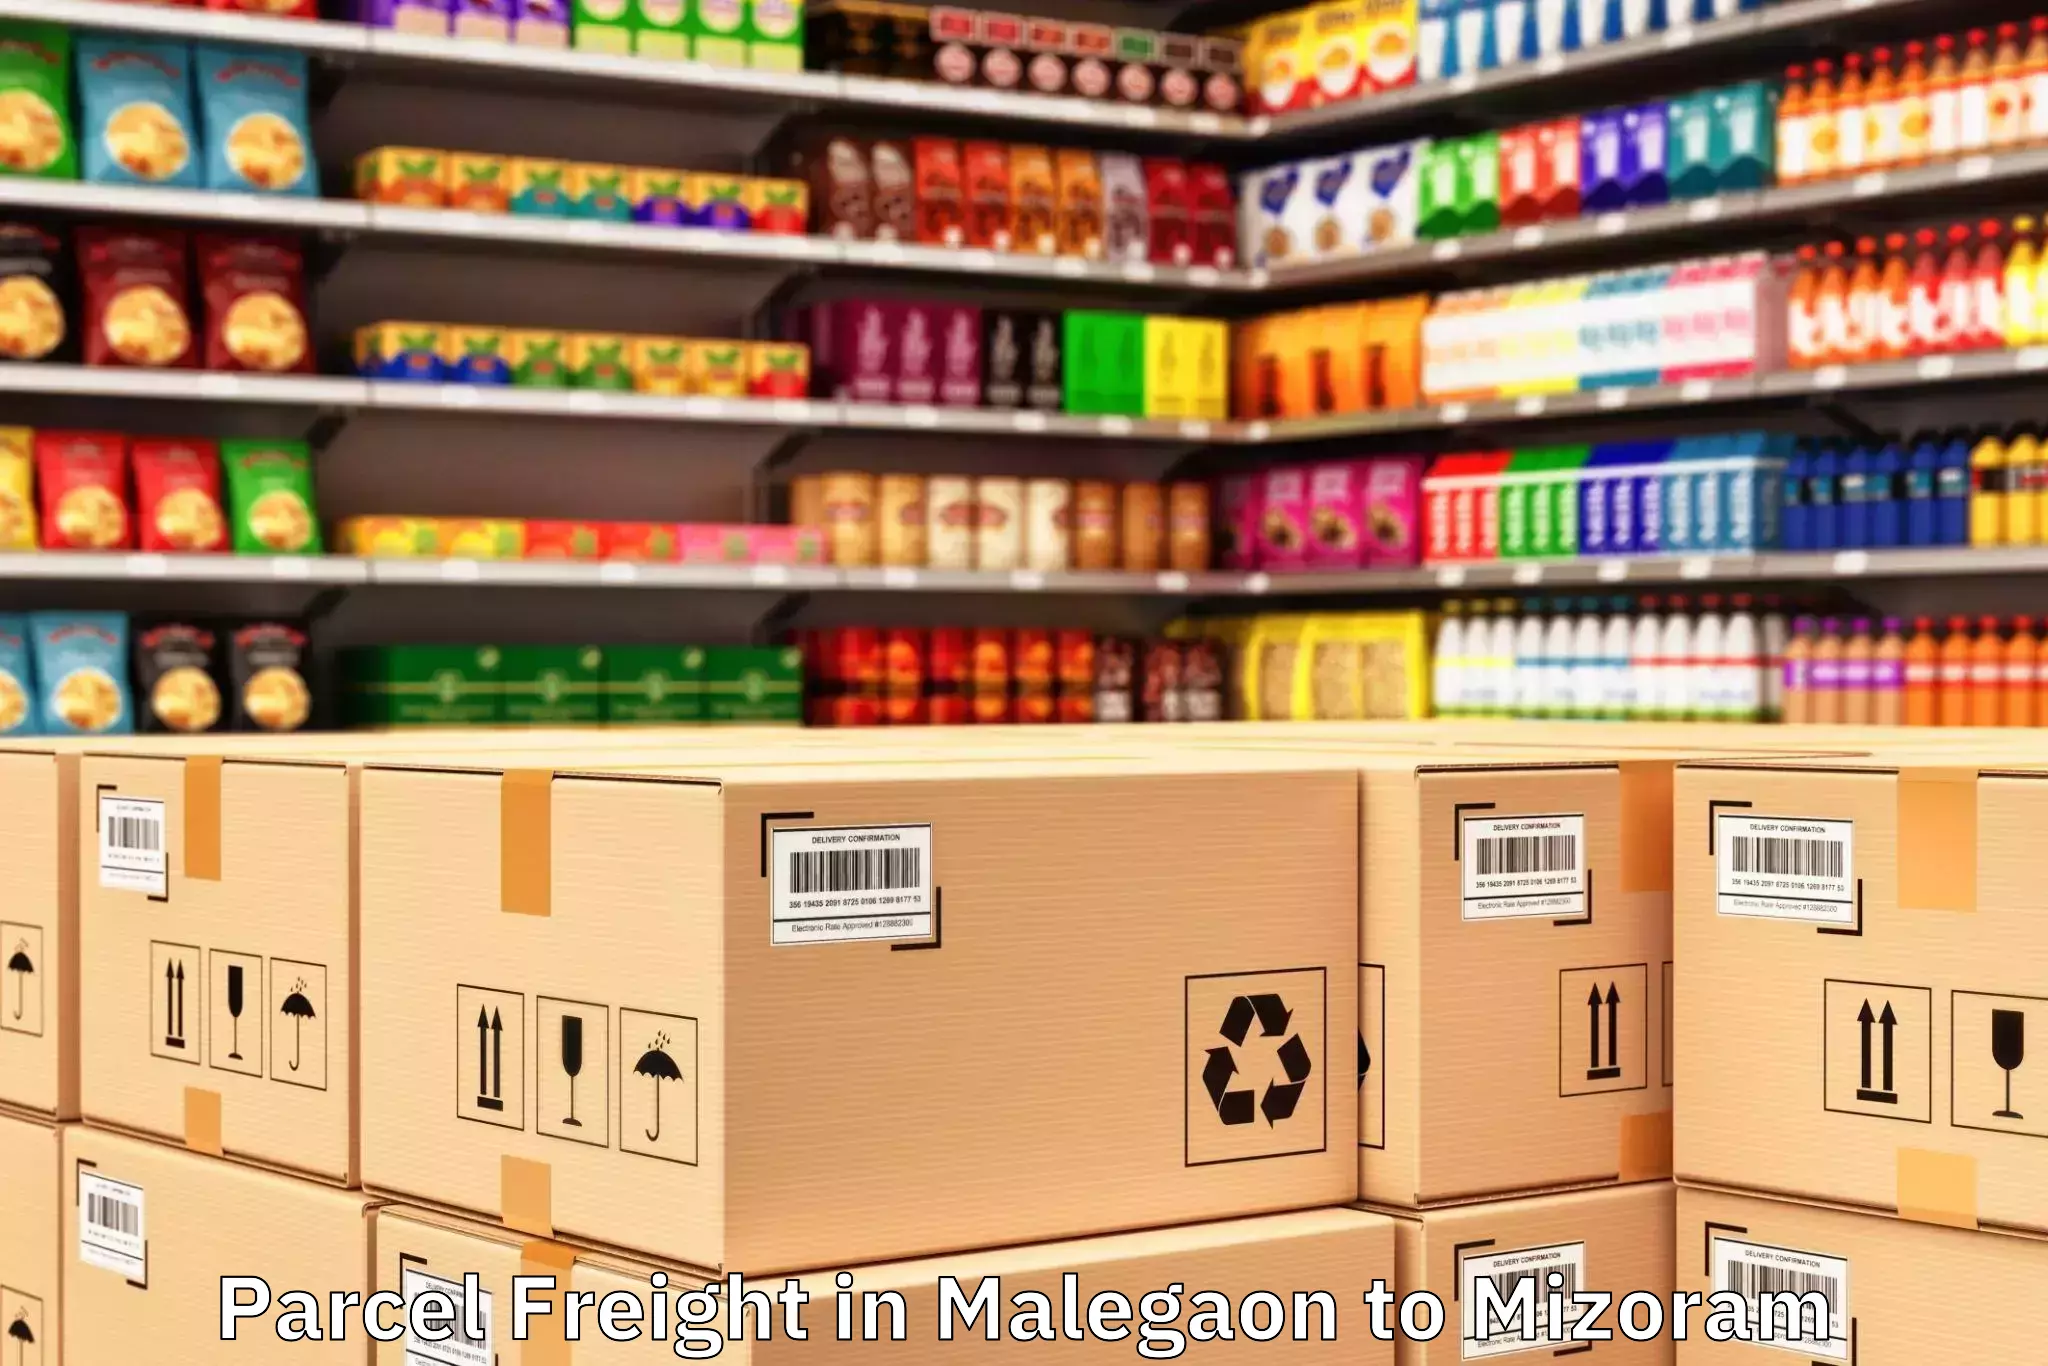 Easy Malegaon to Mizoram Parcel Freight Booking